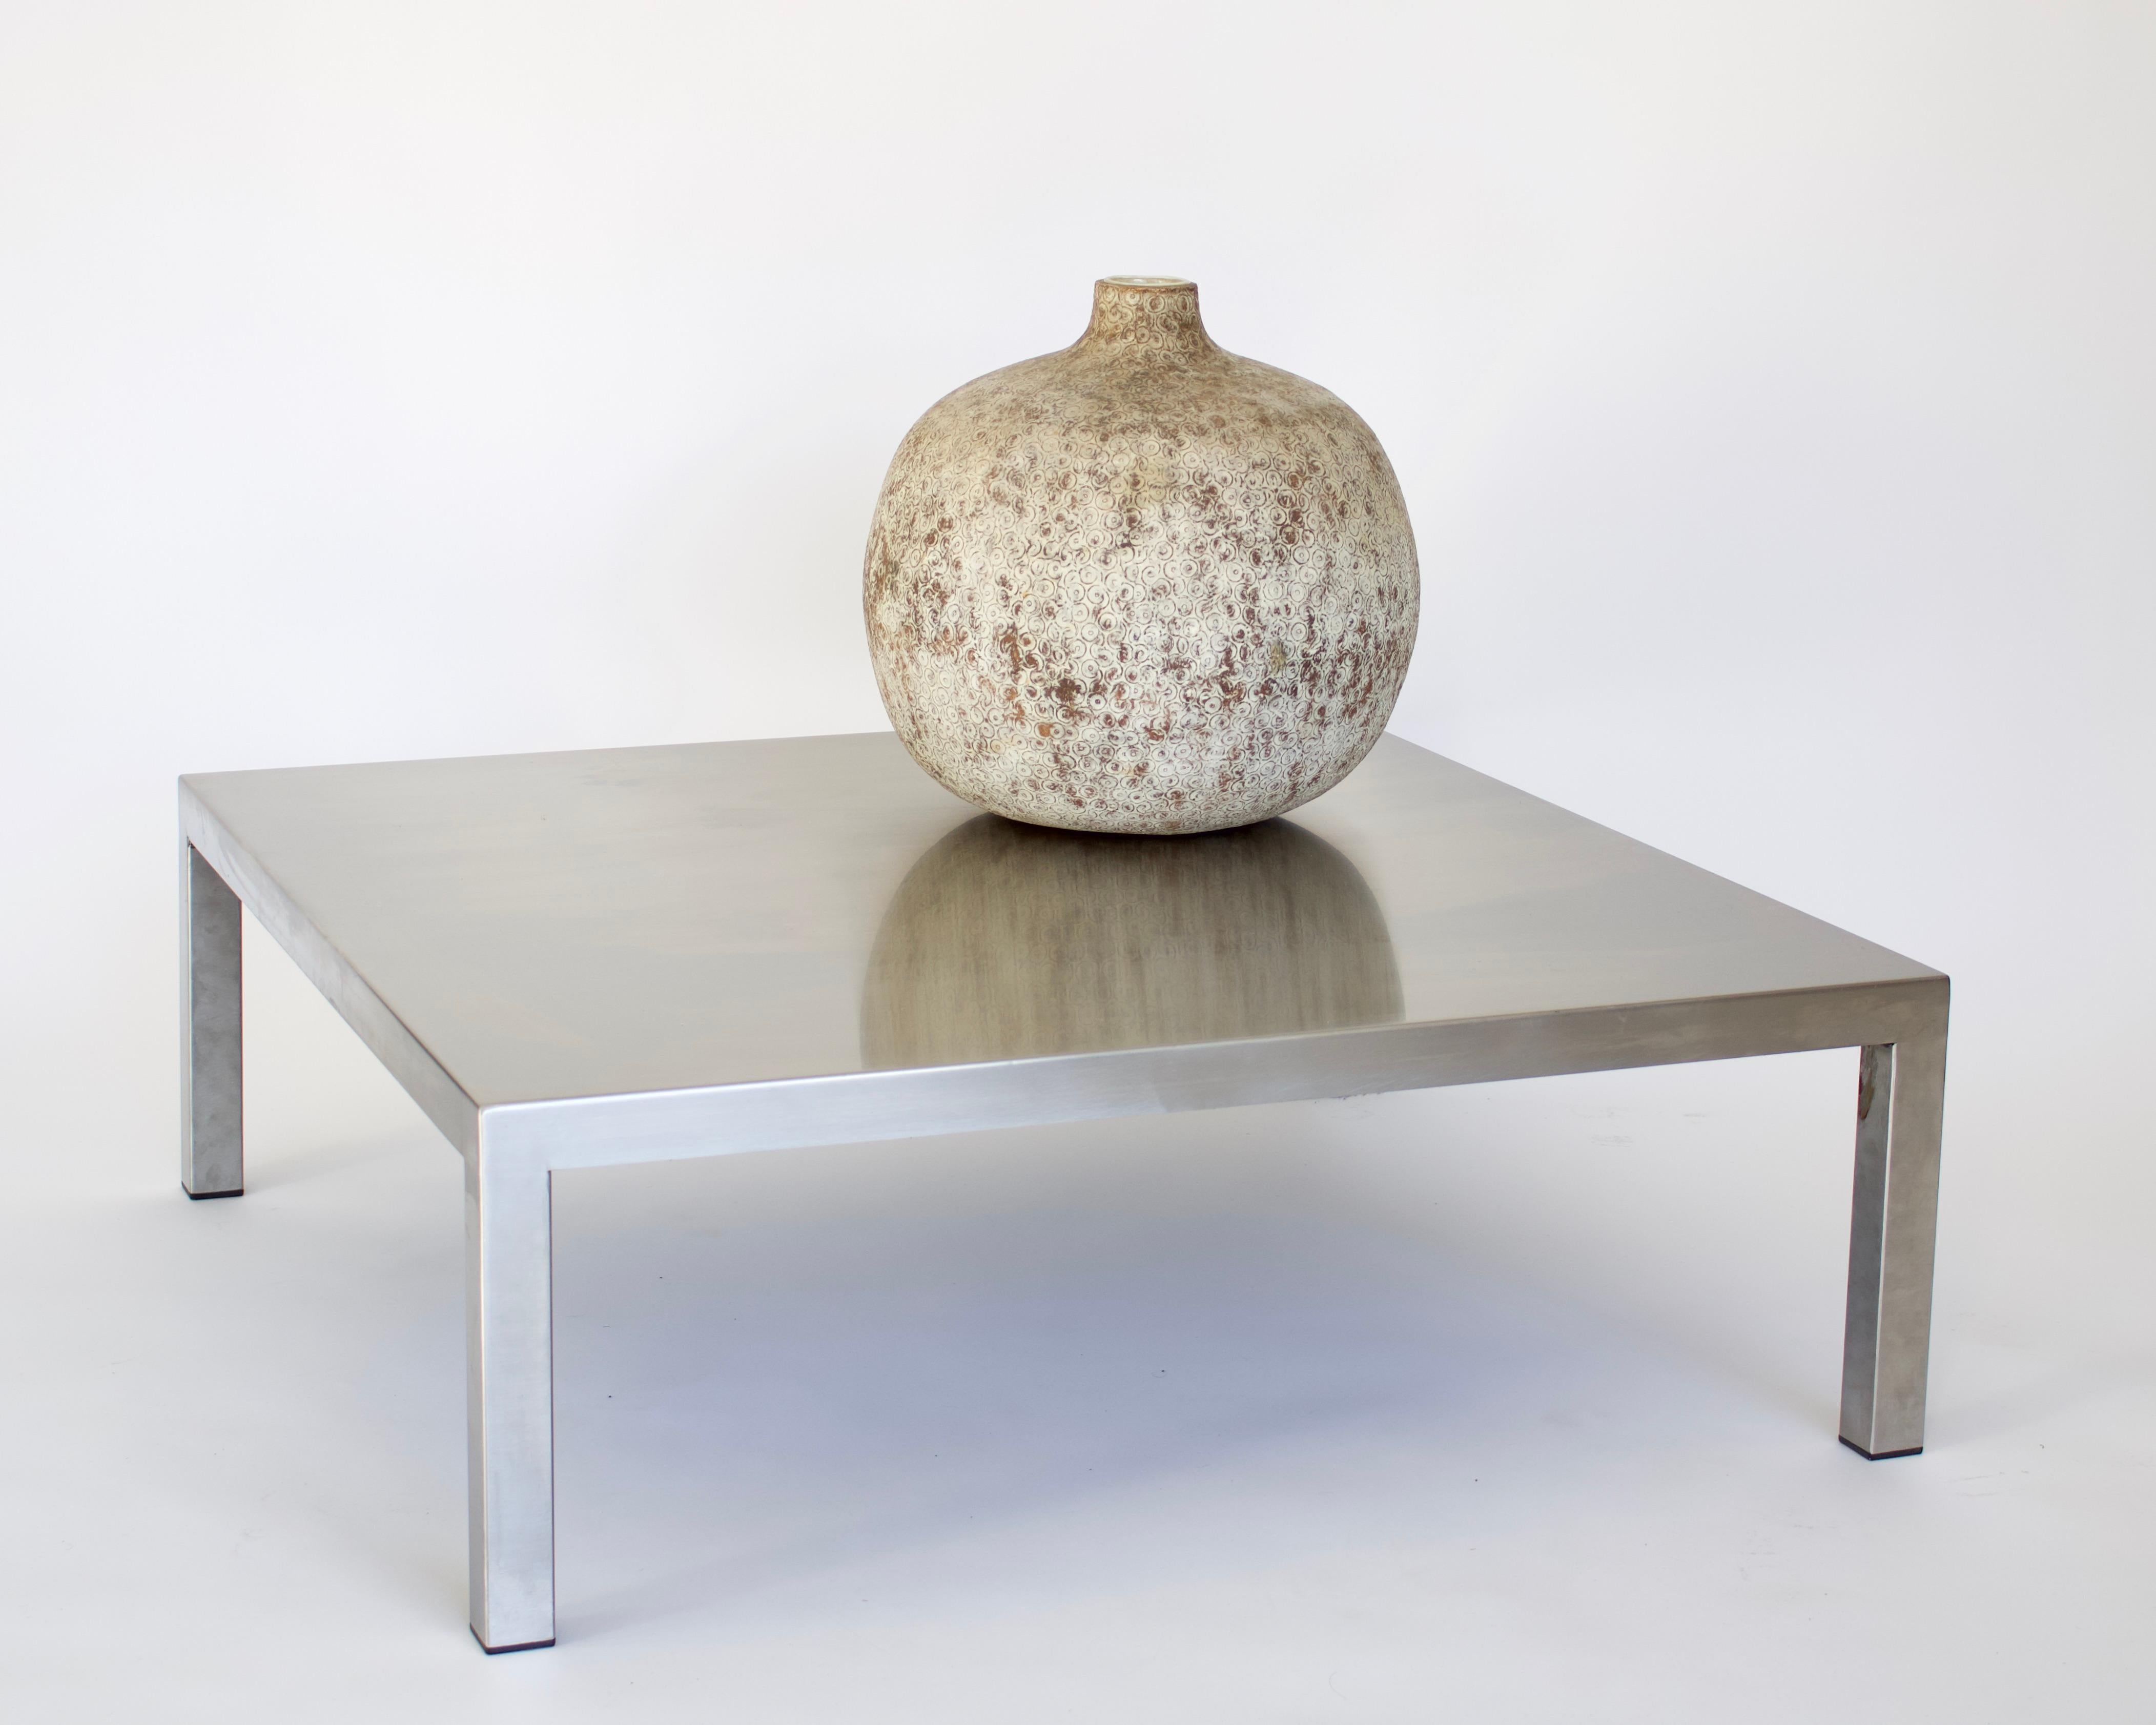 Maria Pergay Square French Stainless Steel Coffee Table, circa 1970 For Sale 4